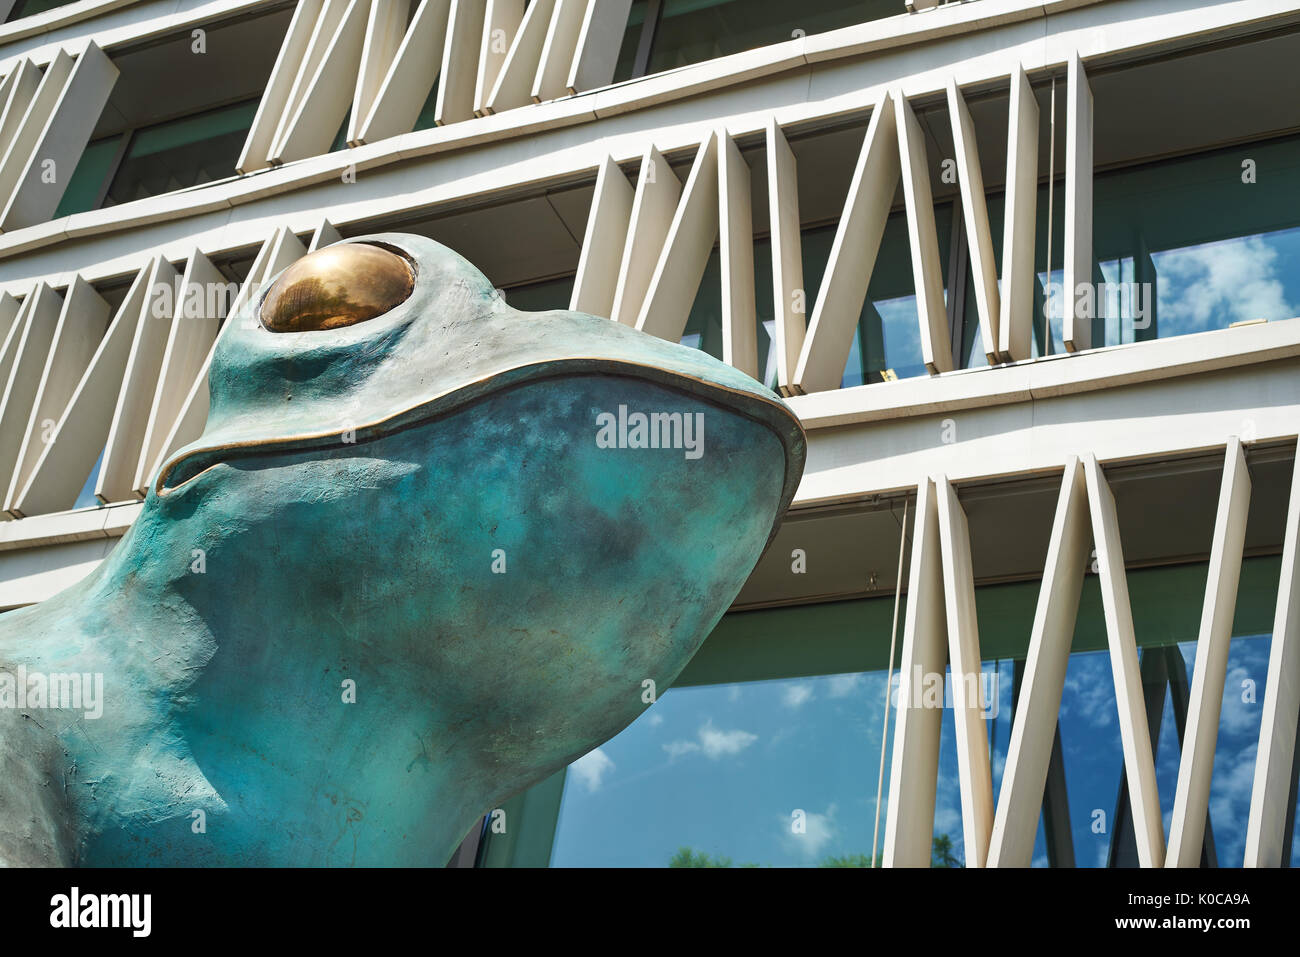 Statue of a frog in Madrid Stock Photo